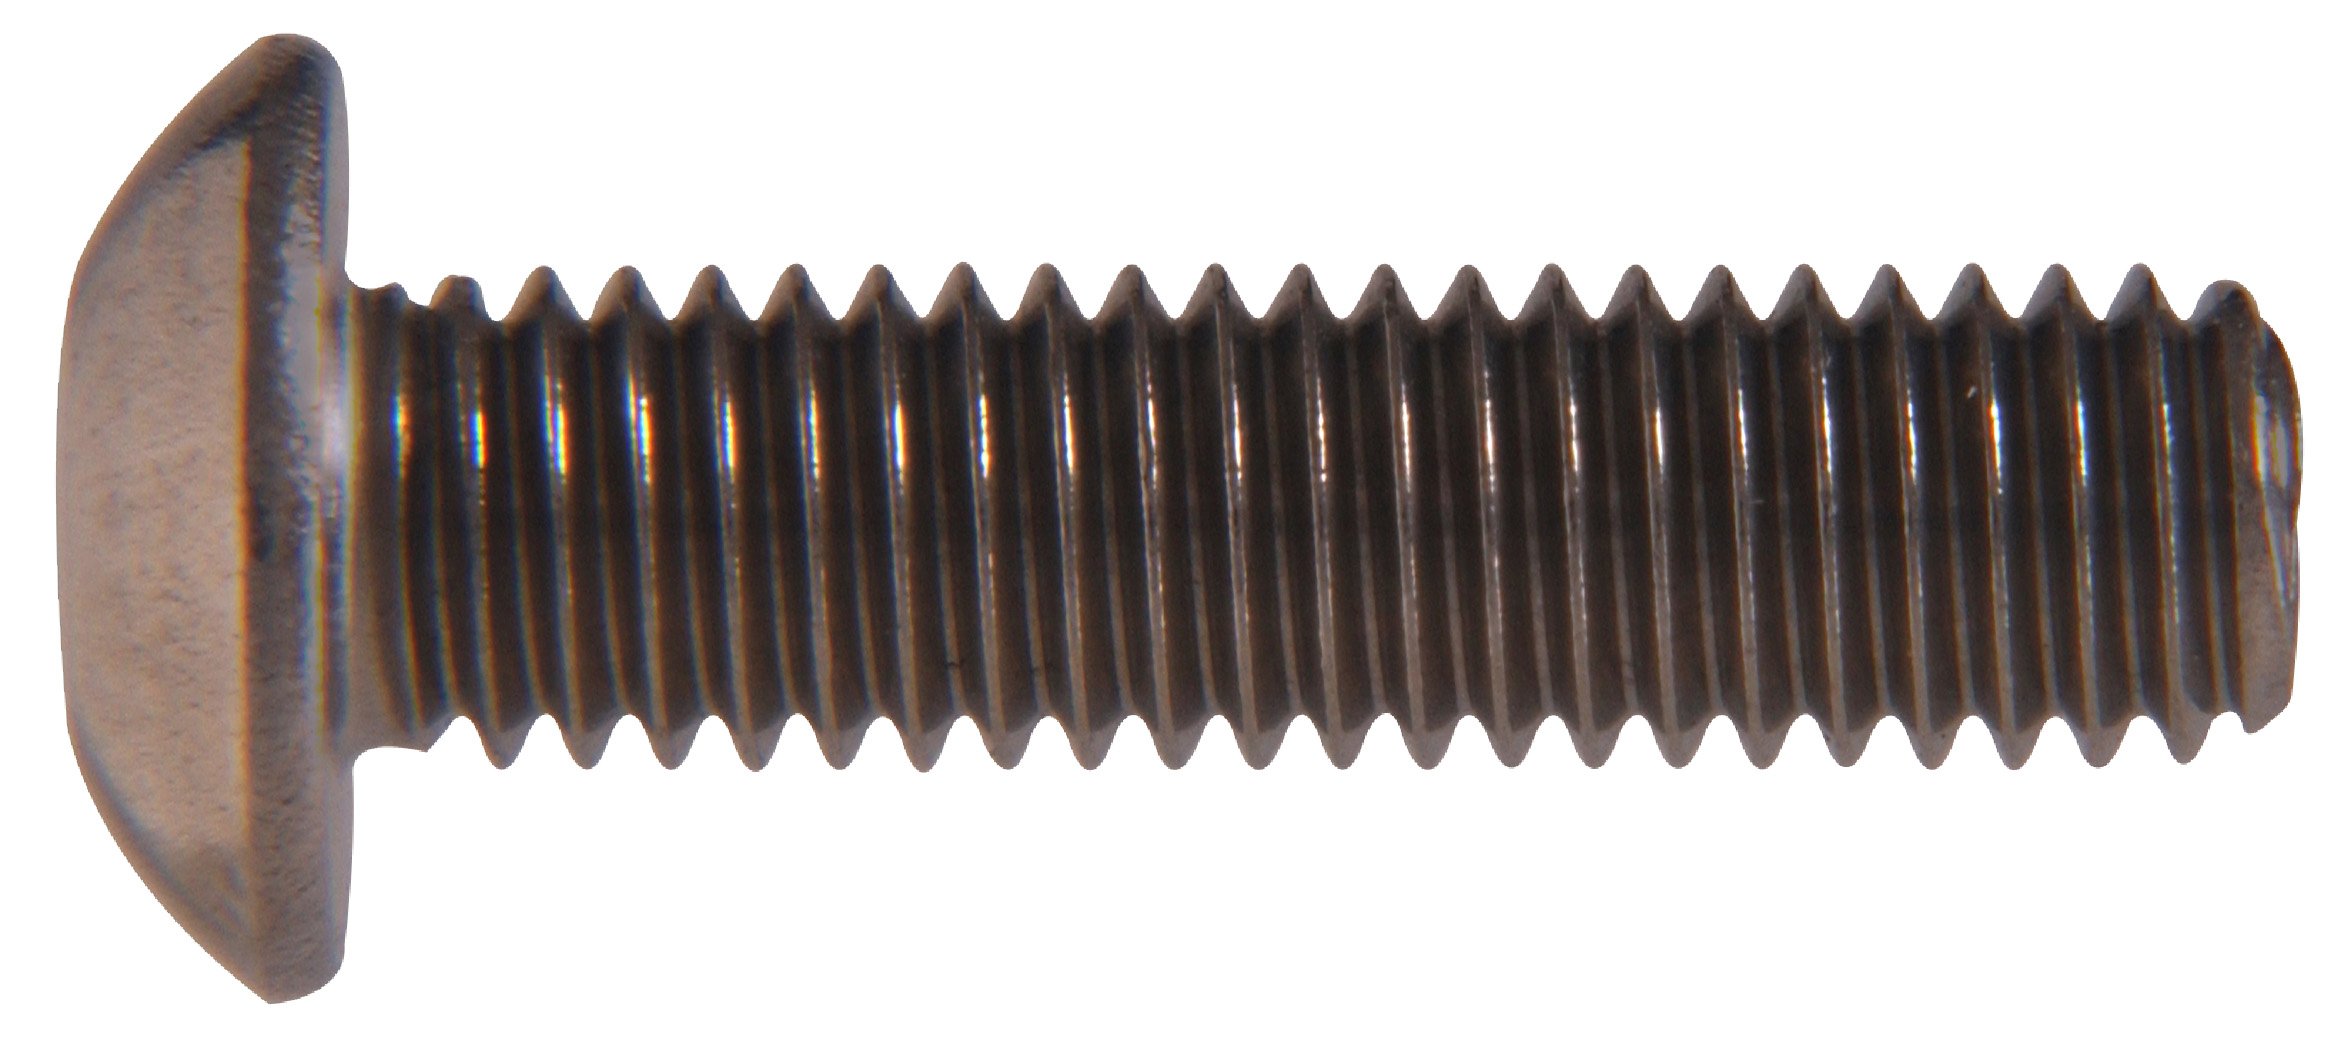 The Hillman Group The Hillman Group 3875 8-32 X 12 In. Button Head Socket Cap Screw (20-Pack)